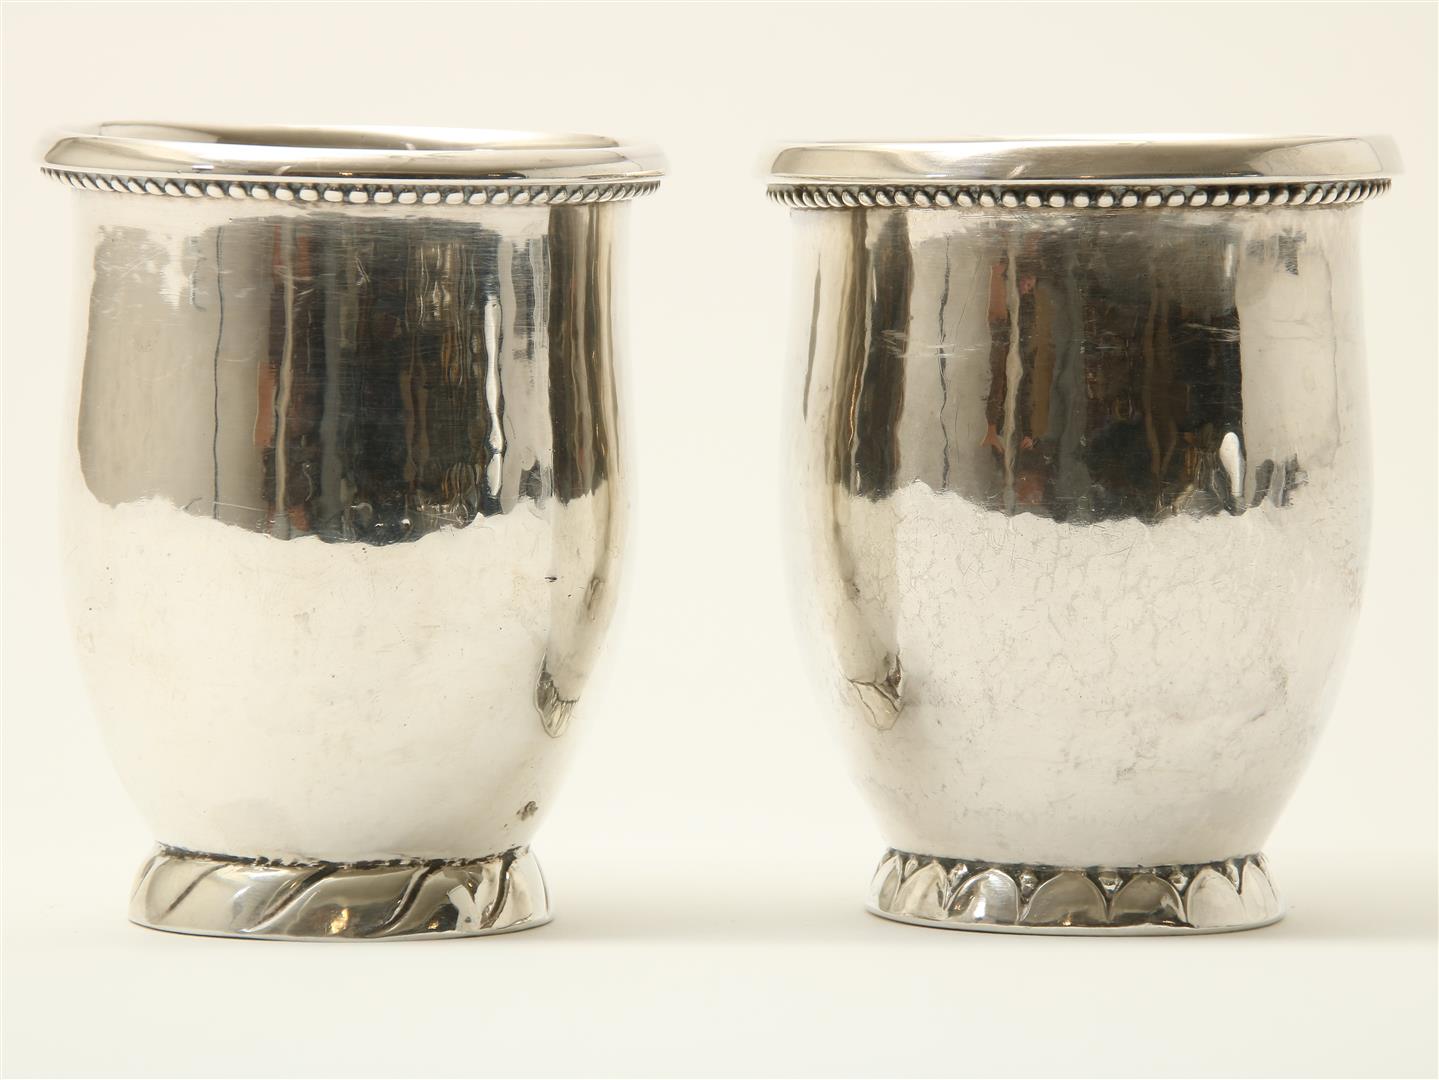 Two silver cups with hammered decor and trimmed with pearl rim, grade 830/000, maker's mark: Georg